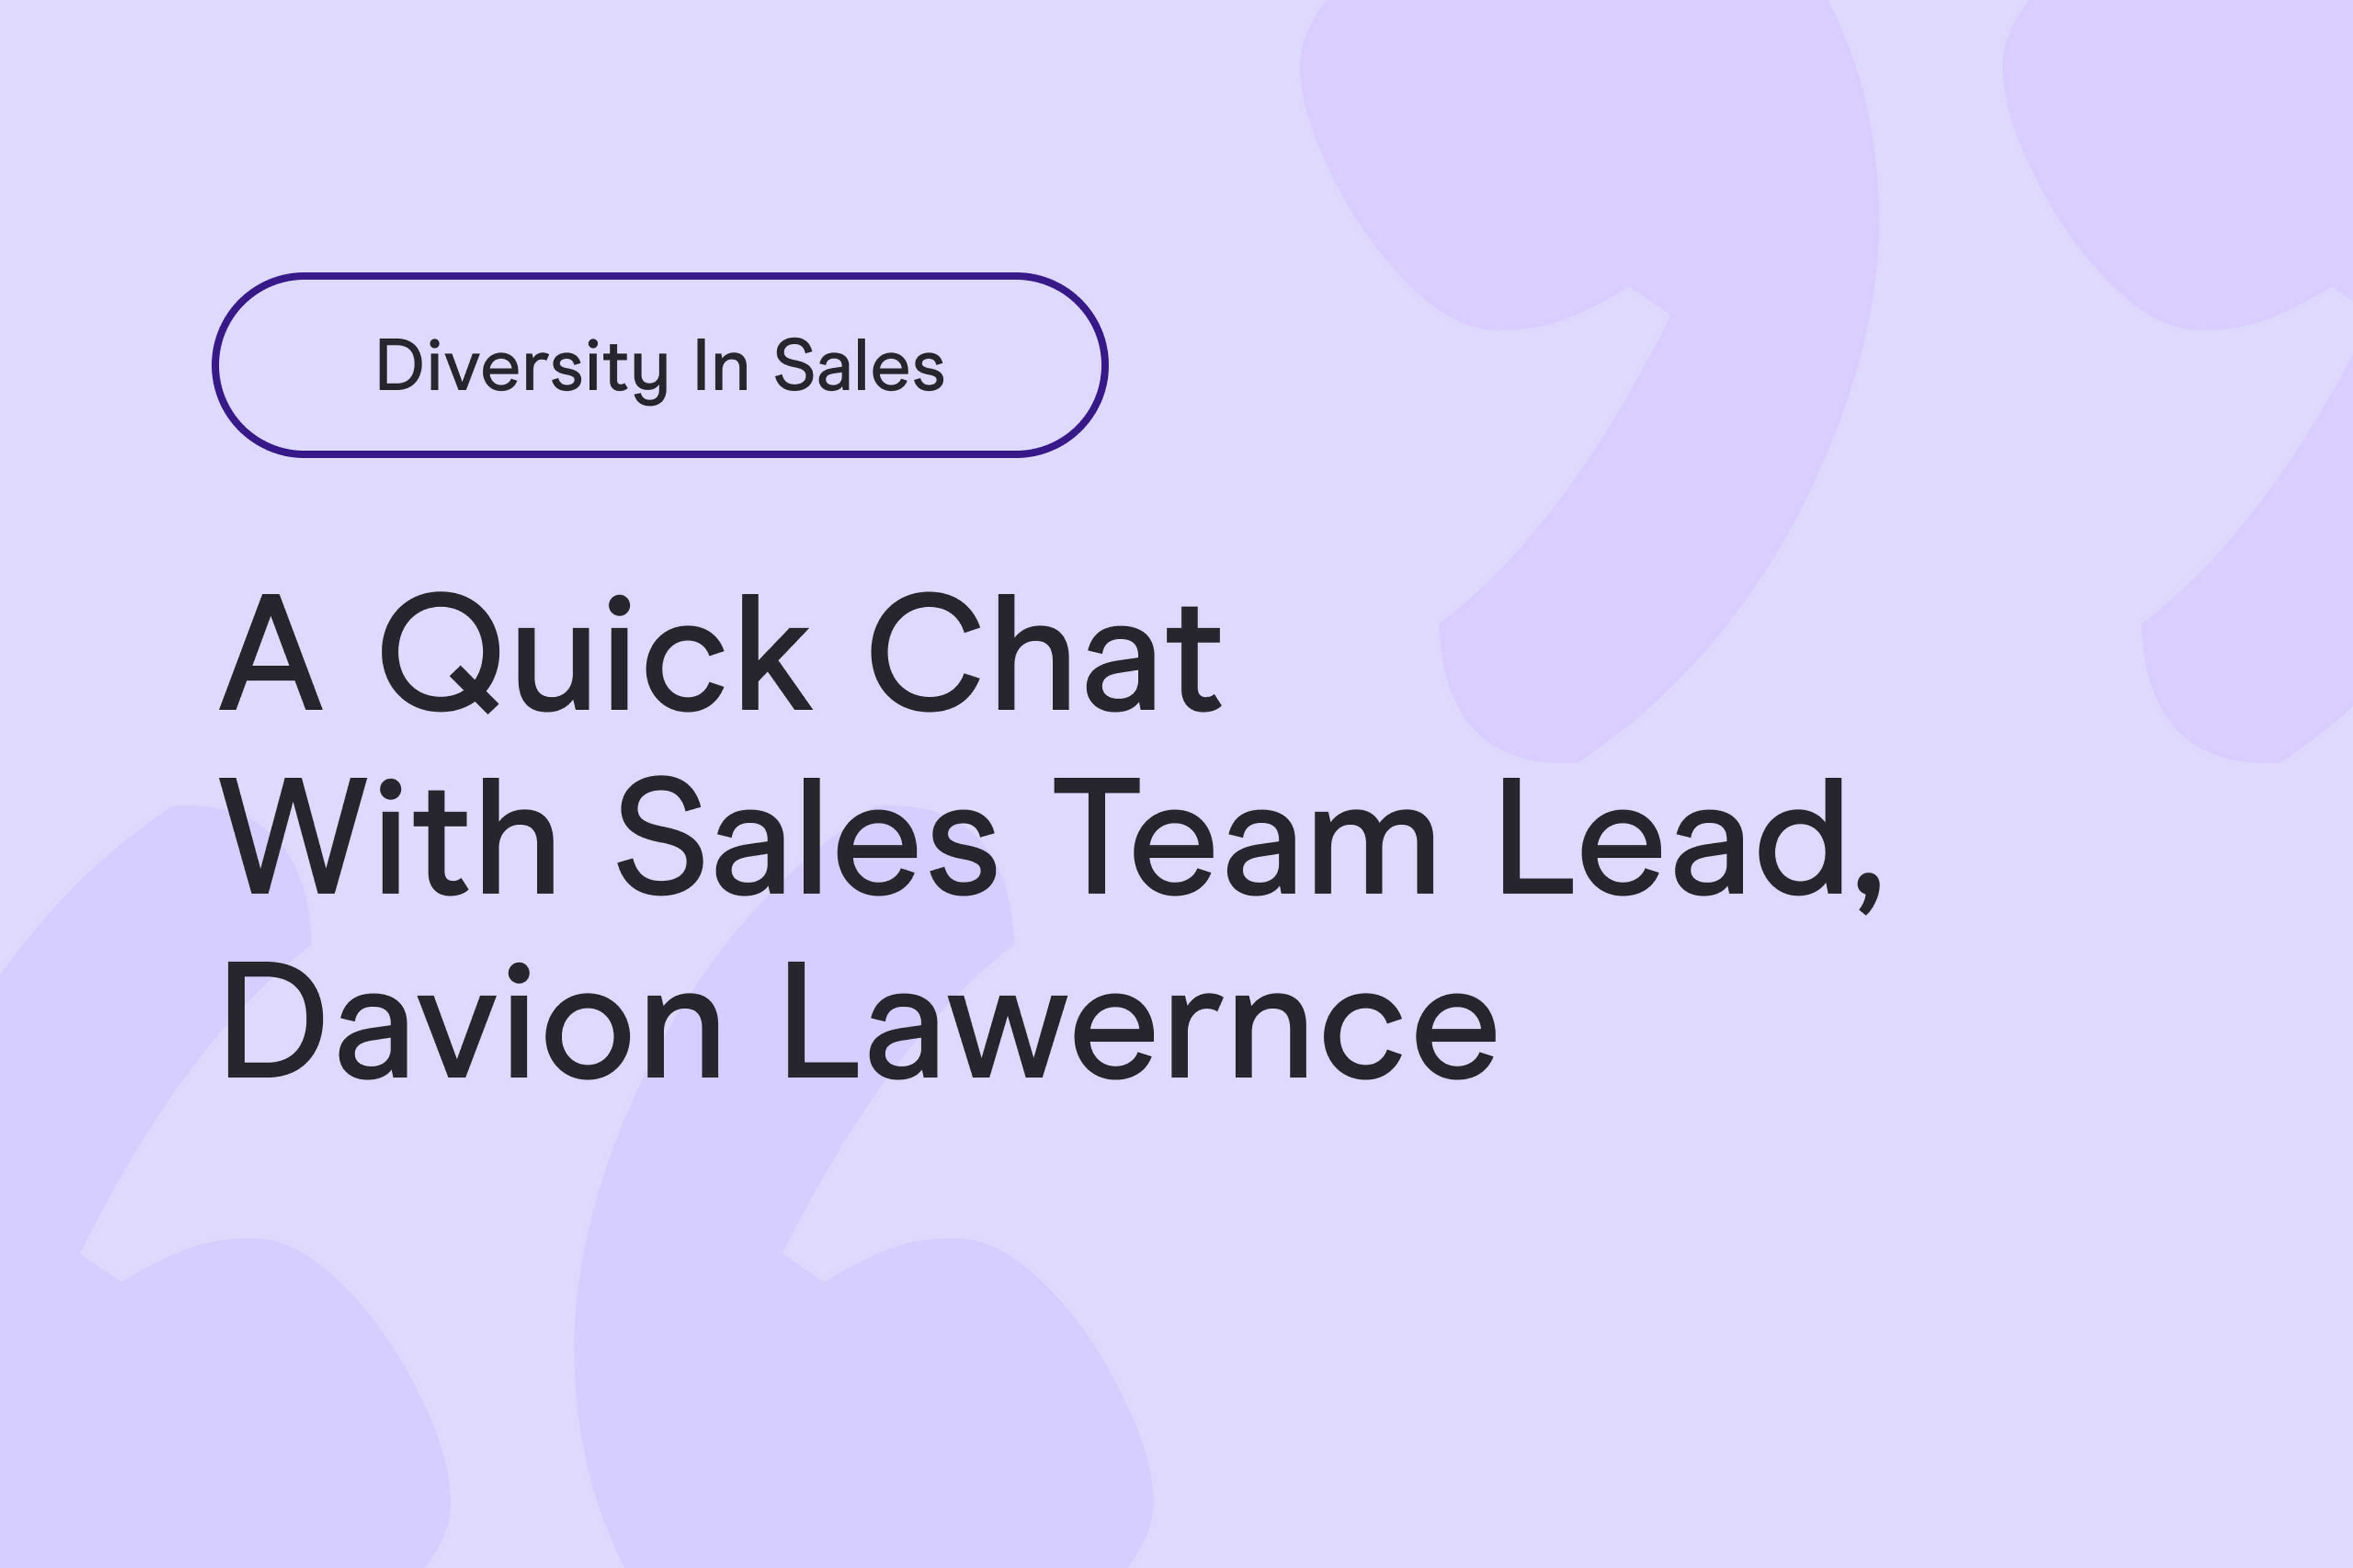 Diversity in Sales: a quick Q&A with Sales Team Lead, Davion Lawrence